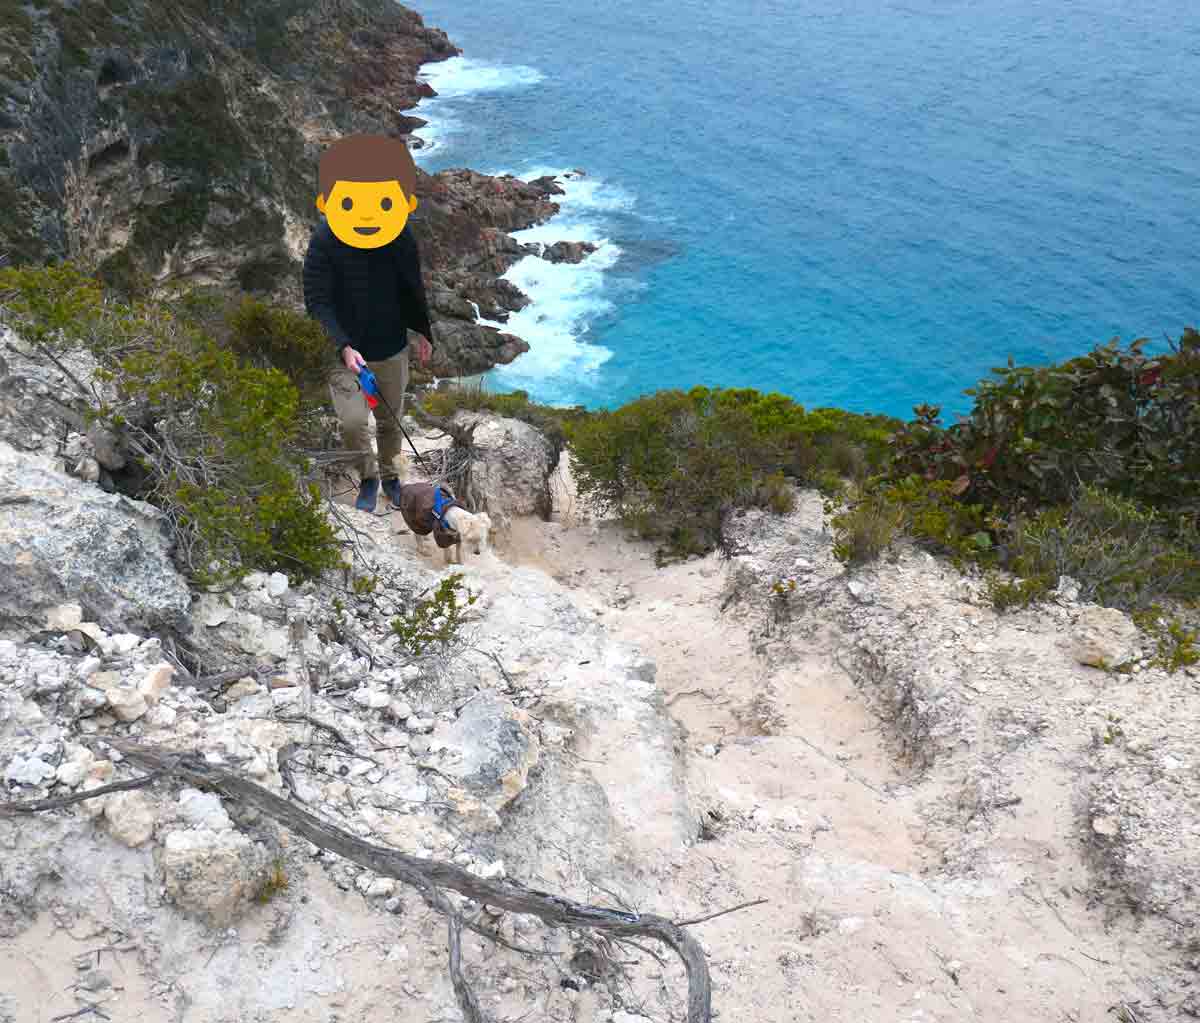 Charlie & hubby walking up the side of the cliff at Try Works Cliff / Calson's Cove, showing the crumbly track. Located in Whaler's Way Sanctuary, Eyre Peninsula, South Australia.